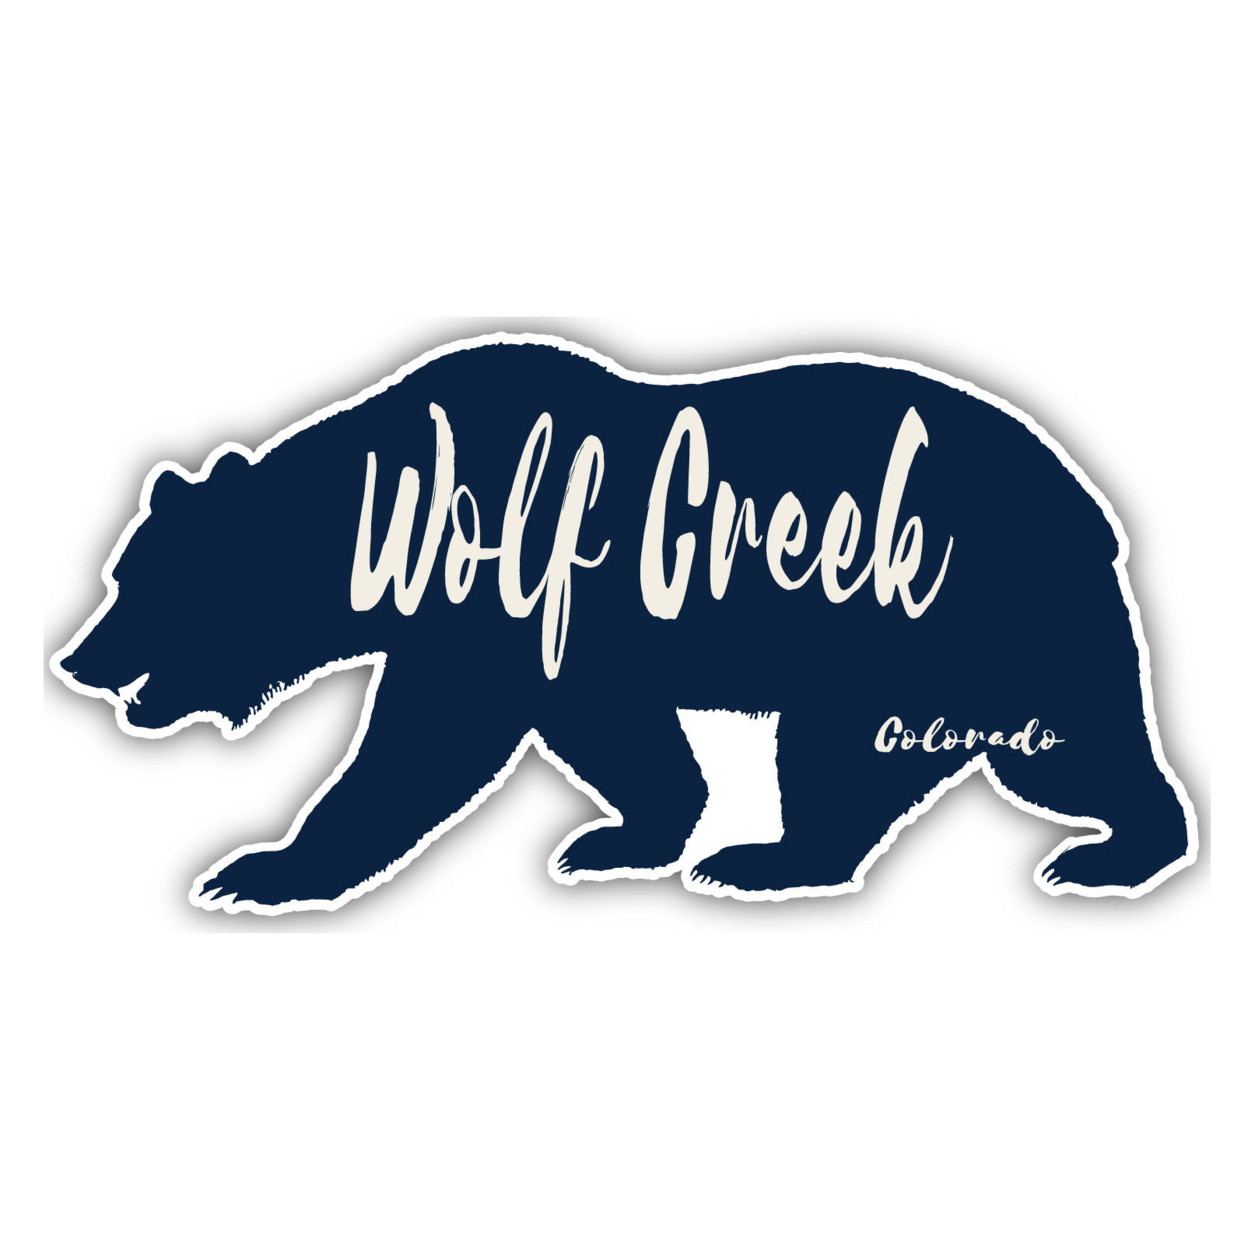 Wolf Creek Colorado Souvenir Decorative Stickers (Choose Theme And Size) - Single Unit, 4-Inch, Great Outdoors